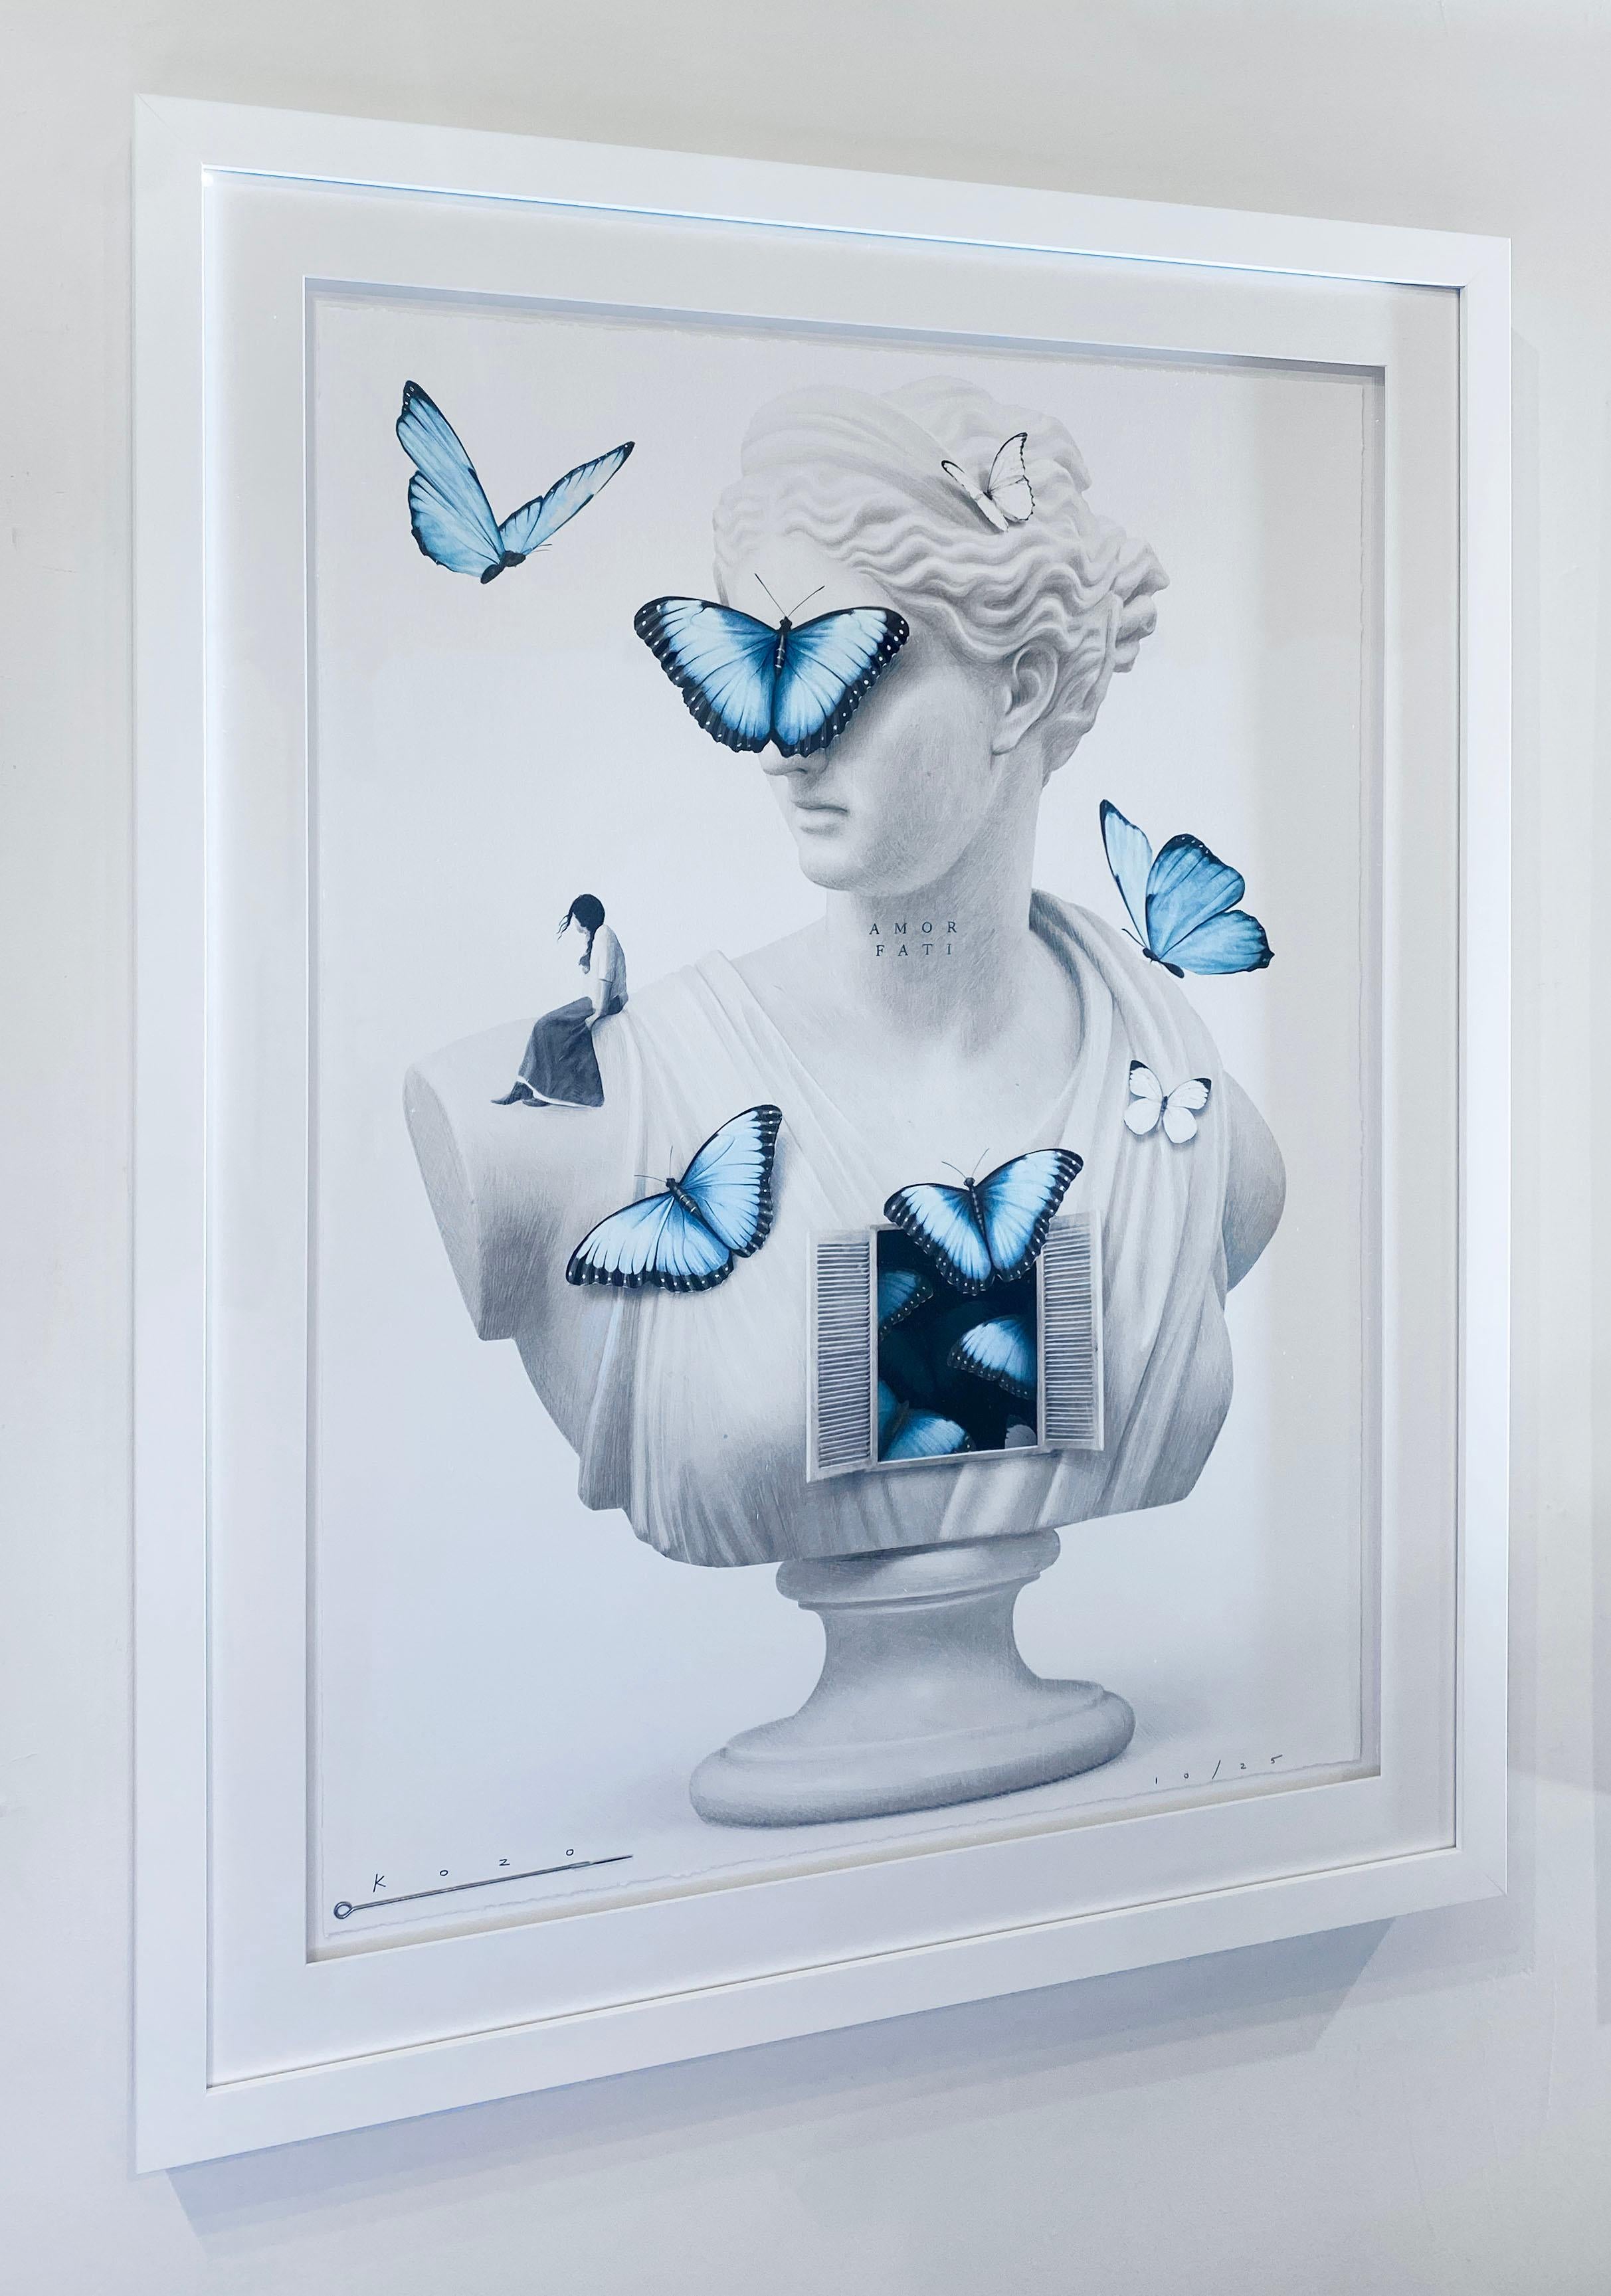 Artist:  , Kozo
Title:  Butterfly Venus 
Medium:  Lithograph and Tattoo ink on paper
Unframed Dimensions:  30